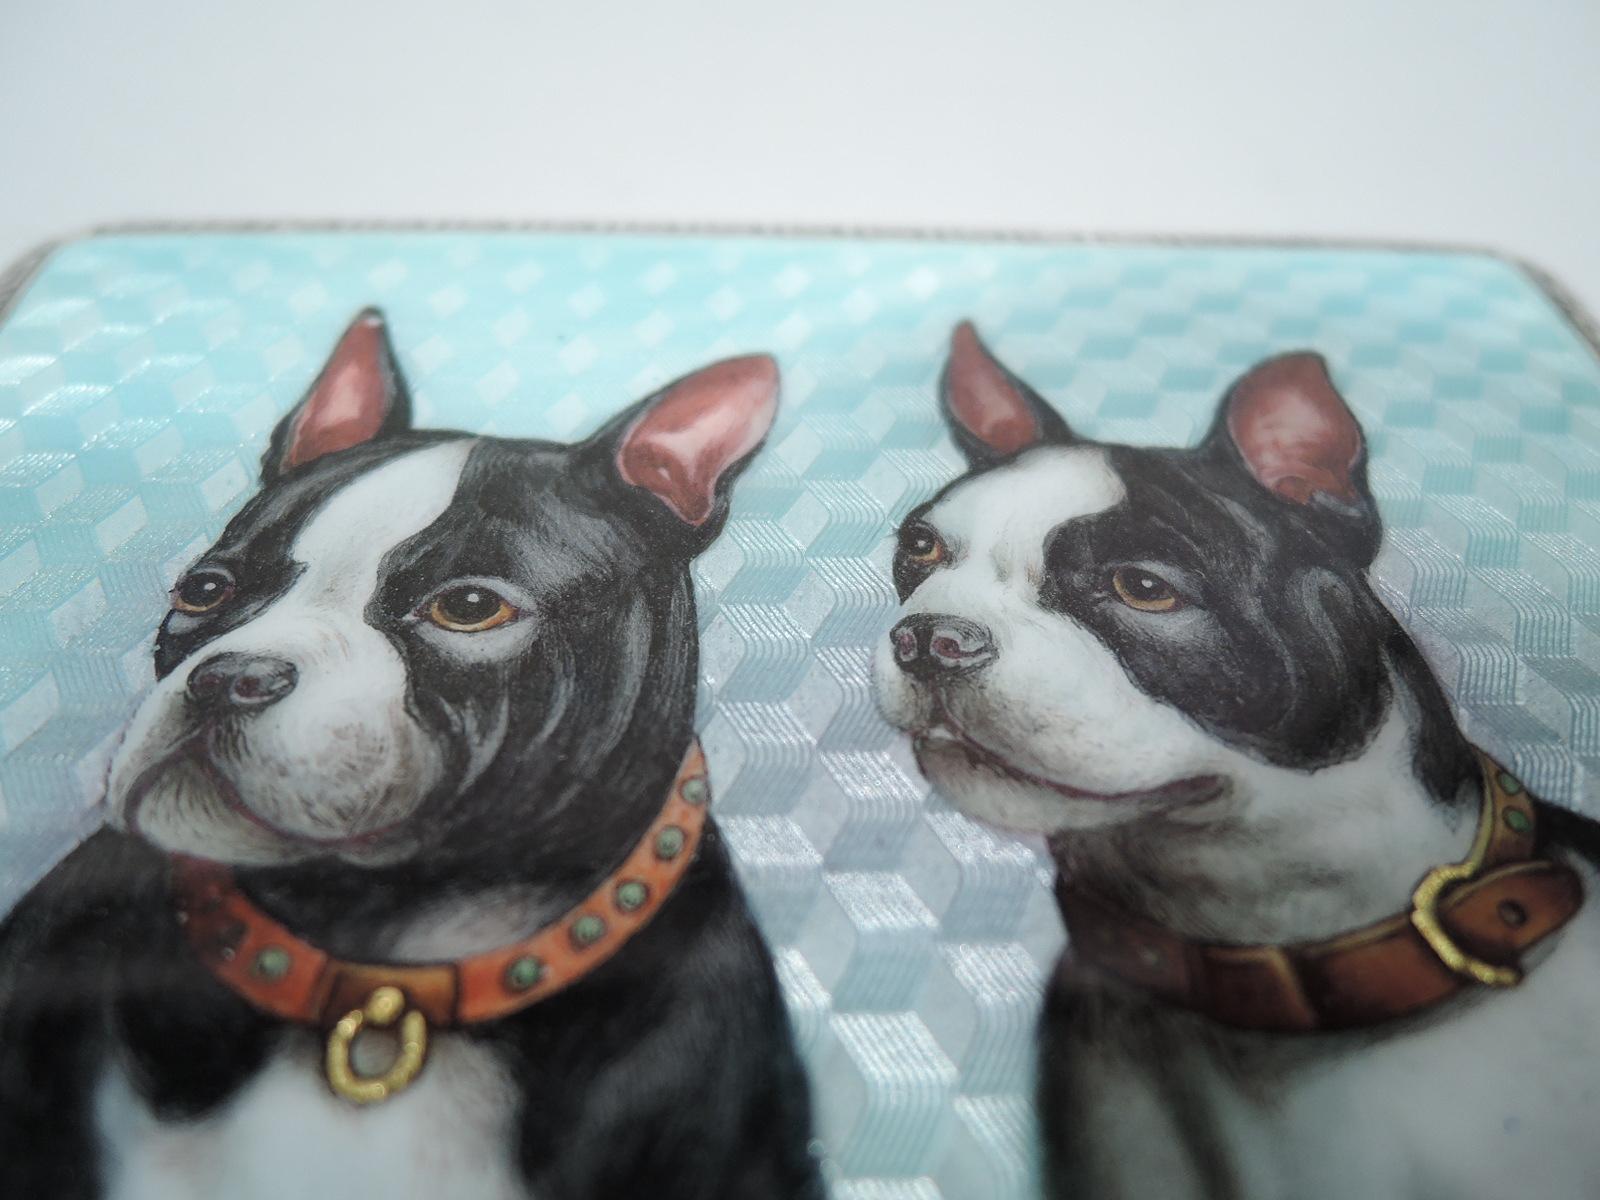 Austrian silver and enamel cigarette case, ca 1910. Rectangular and hinged. On cover is enameled doggy double portrait: 2 Boston terriers with erect ears and steadfast gaze. The studded leather collars suggest they’re taken. Companionable canines on